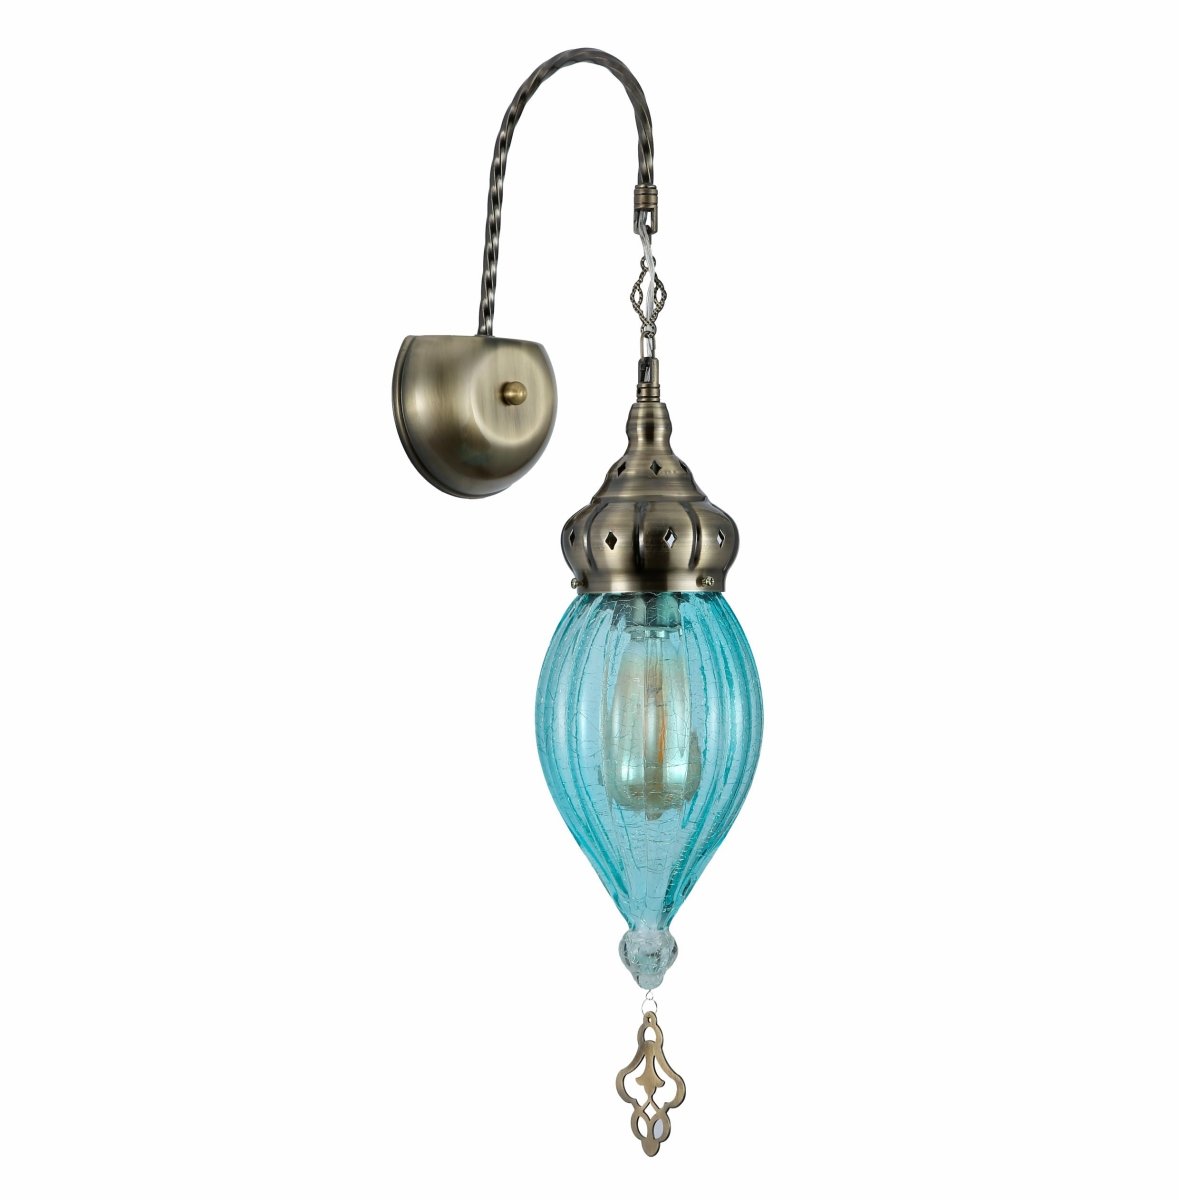 Main image of Blue Glass Antique Bronze Metal Body Moroccan Style Wall Light with E27 Fitting | TEKLED 151-194581